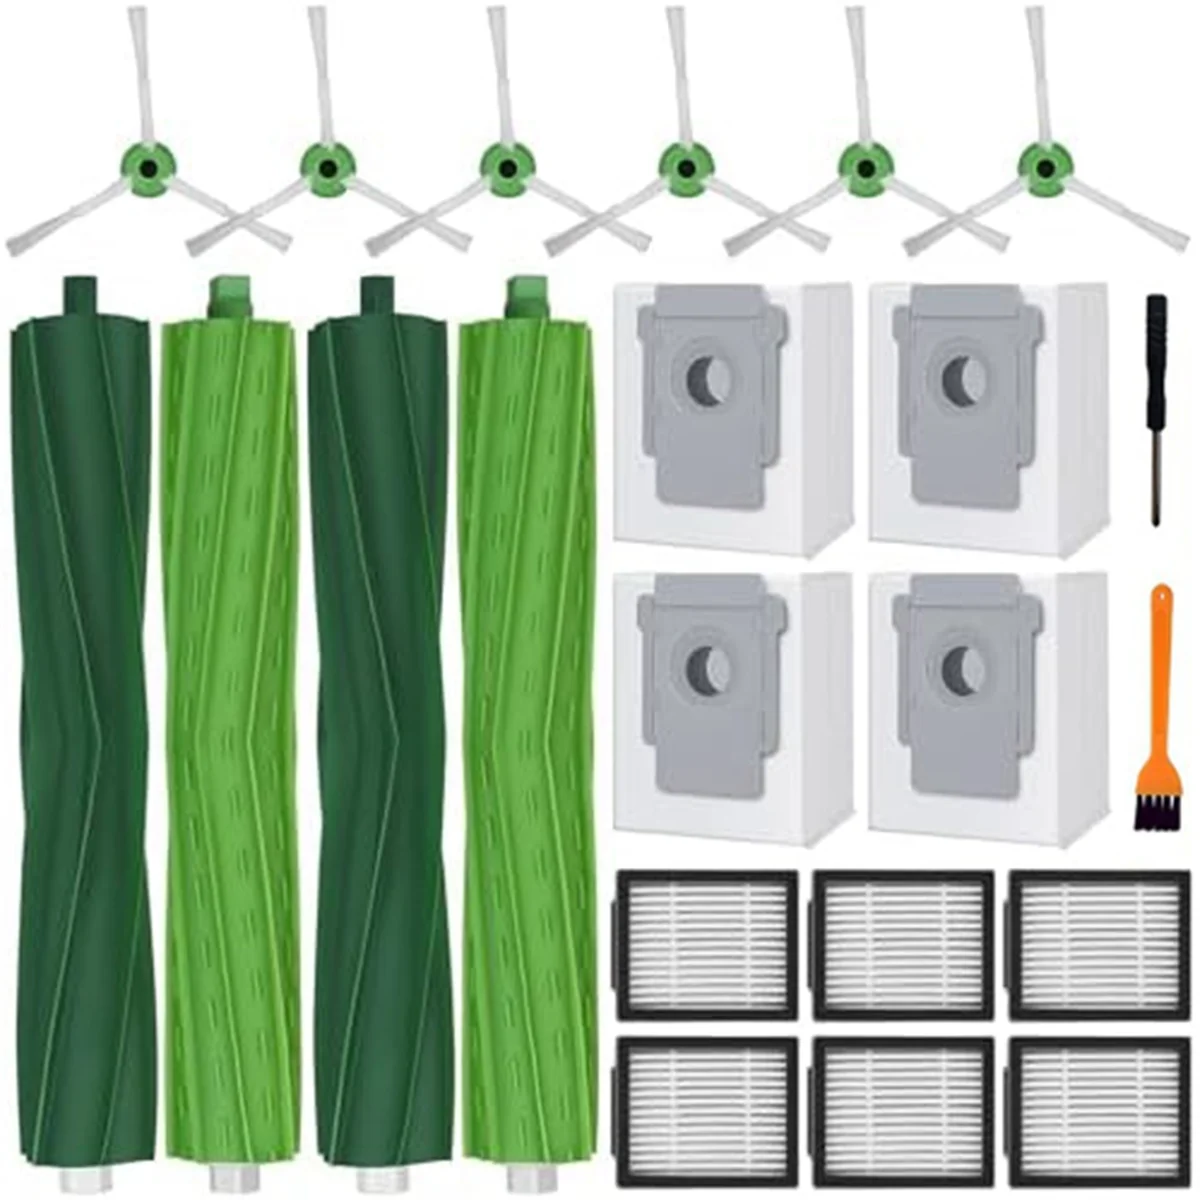 

Replacement Accessories for iRobot Roomba I7 I7+ J7 I8 I8+ I3 I3+ I4 I4+ I6 I6+ J7+, Dust Bags, Filters, Side Brushes